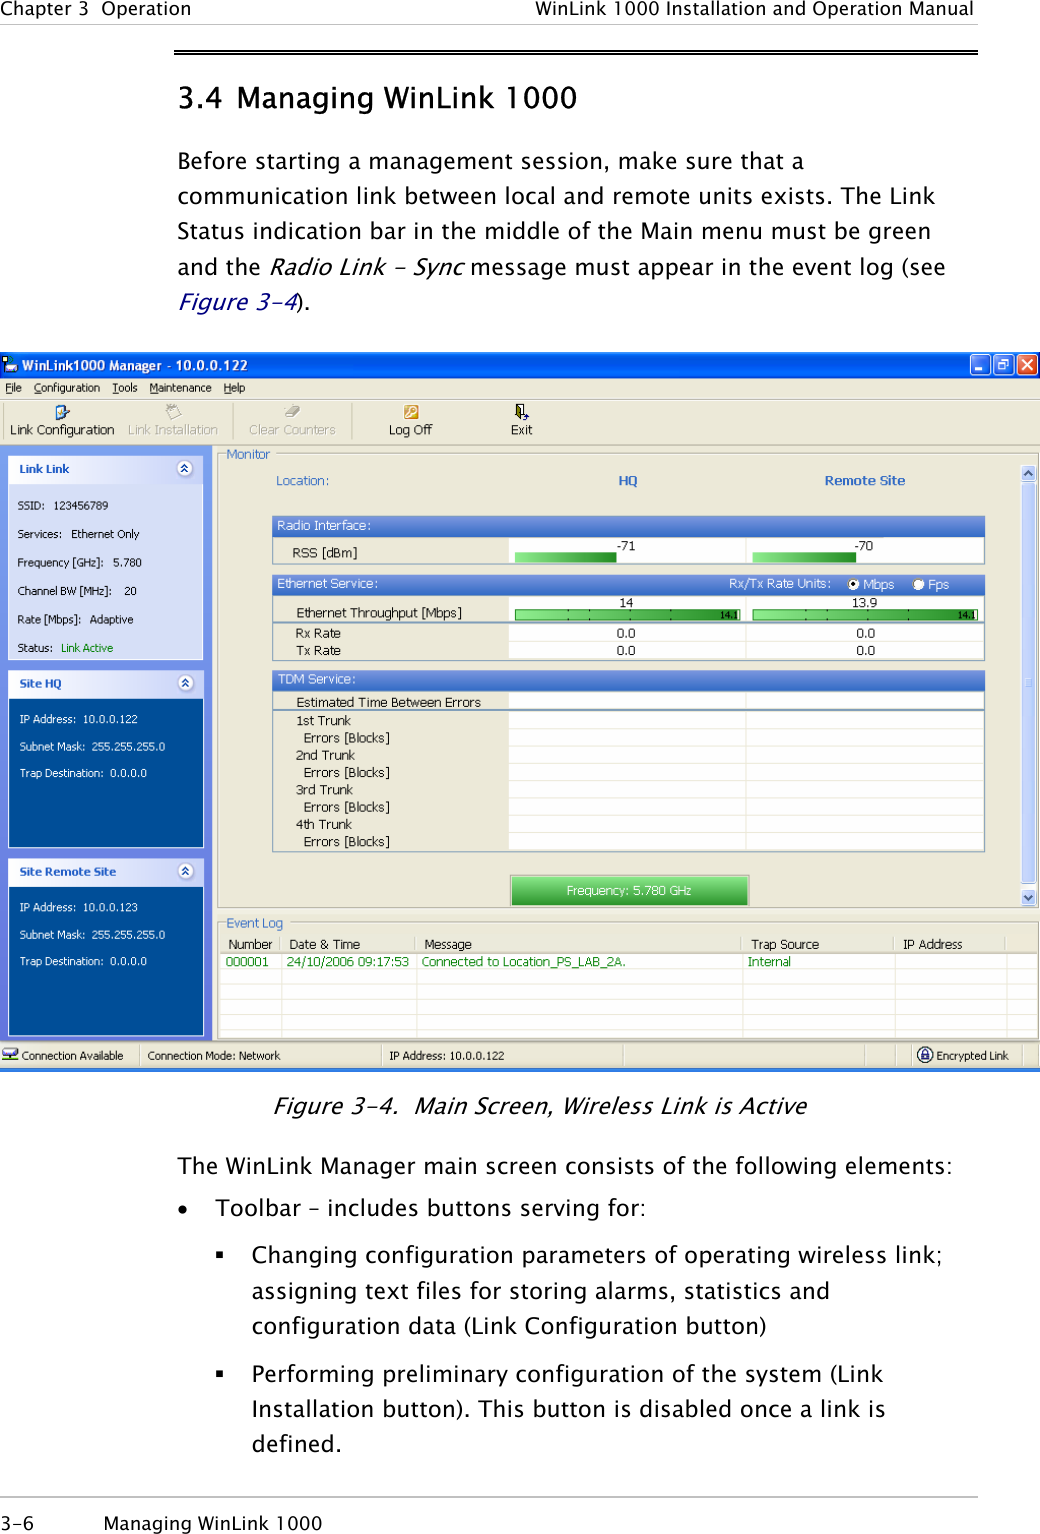 Chapter  3  Operation  WinLink 1000 Installation and Operation Manual 3.4 Managing WinLink 1000 Before starting a management session, make sure that a communication link between local and remote units exists. The Link Status indication bar in the middle of the Main menu must be green and the Radio Link - Sync message must appear in the event log (see Figure  3-4).  Figure  3-4.  Main Screen, Wireless Link is Active The WinLink Manager main screen consists of the following elements: • Toolbar – includes buttons serving for:  Changing configuration parameters of operating wireless link; assigning text files for storing alarms, statistics and configuration data (Link Configuration button)  Performing preliminary configuration of the system (Link Installation button). This button is disabled once a link is defined. 3-6  Managing WinLink 1000  